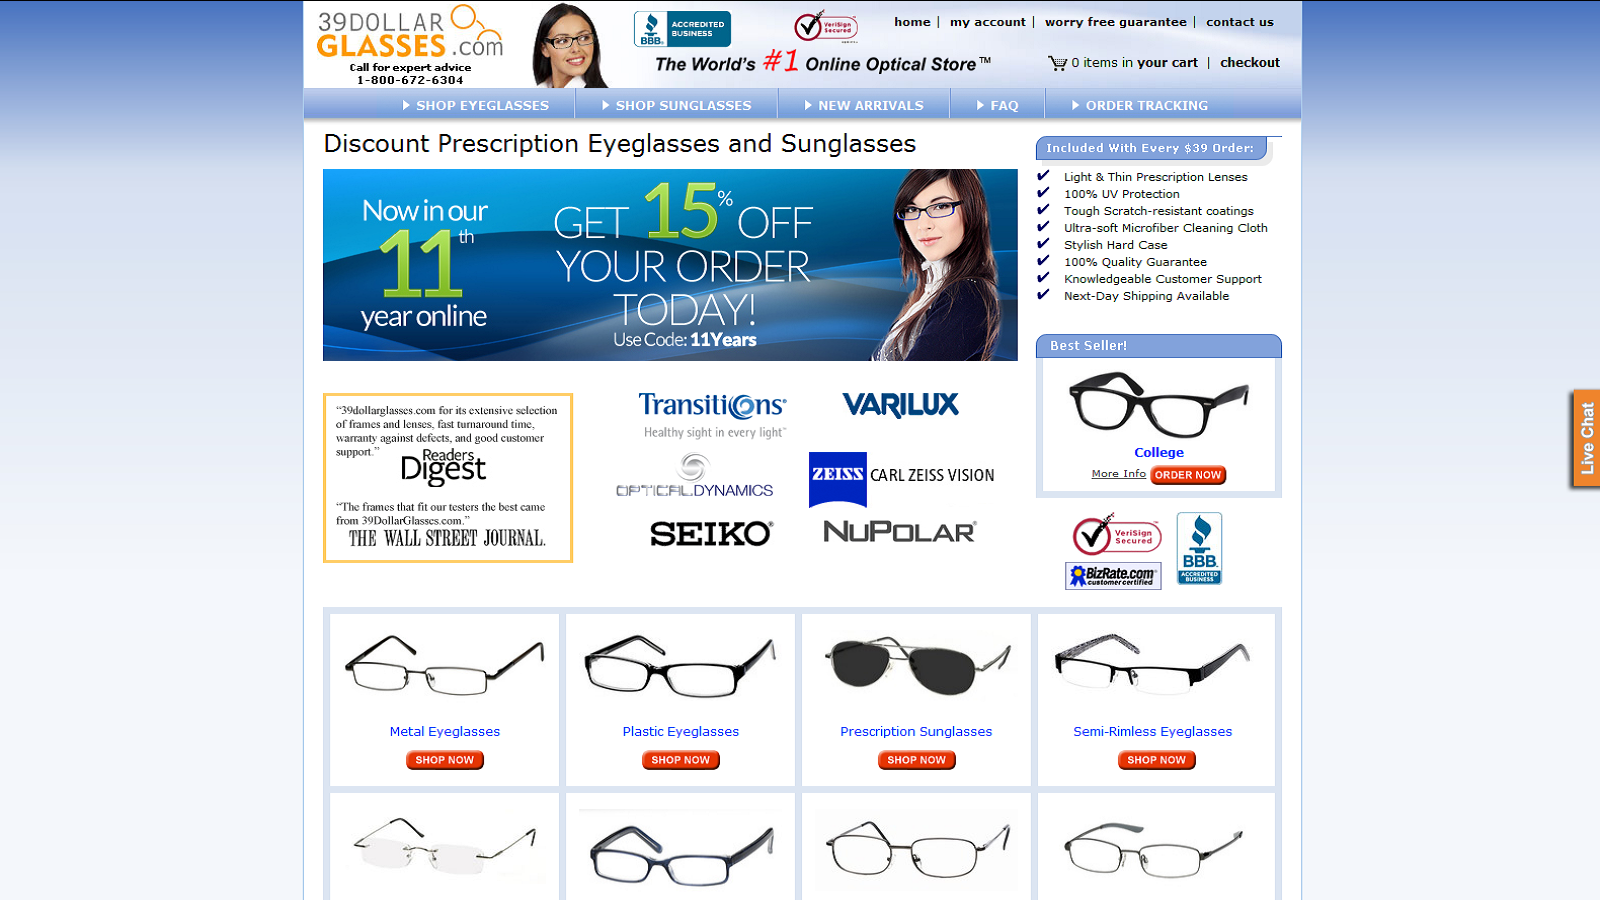 39 Dollar Glasses Coupons & Promo Codes